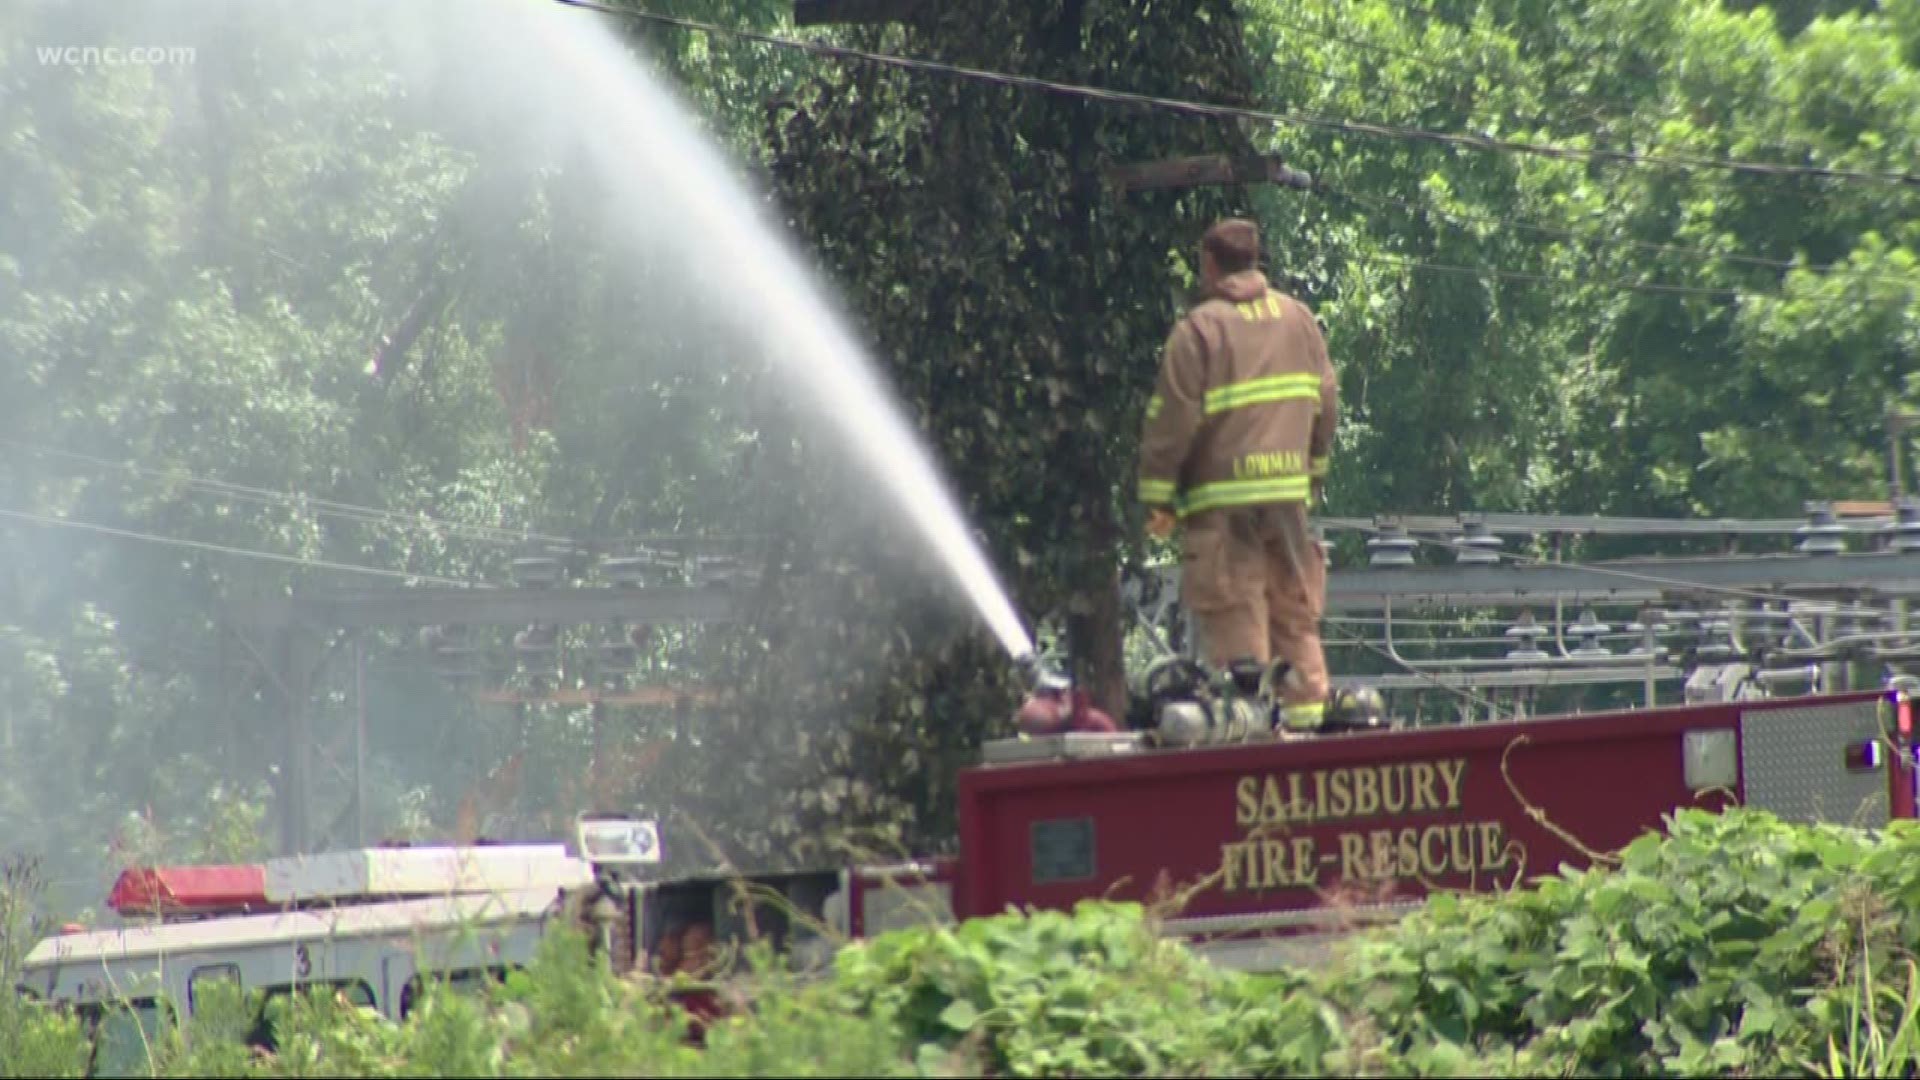 Hydrant hazards: Firefighters go roughly a mile for water